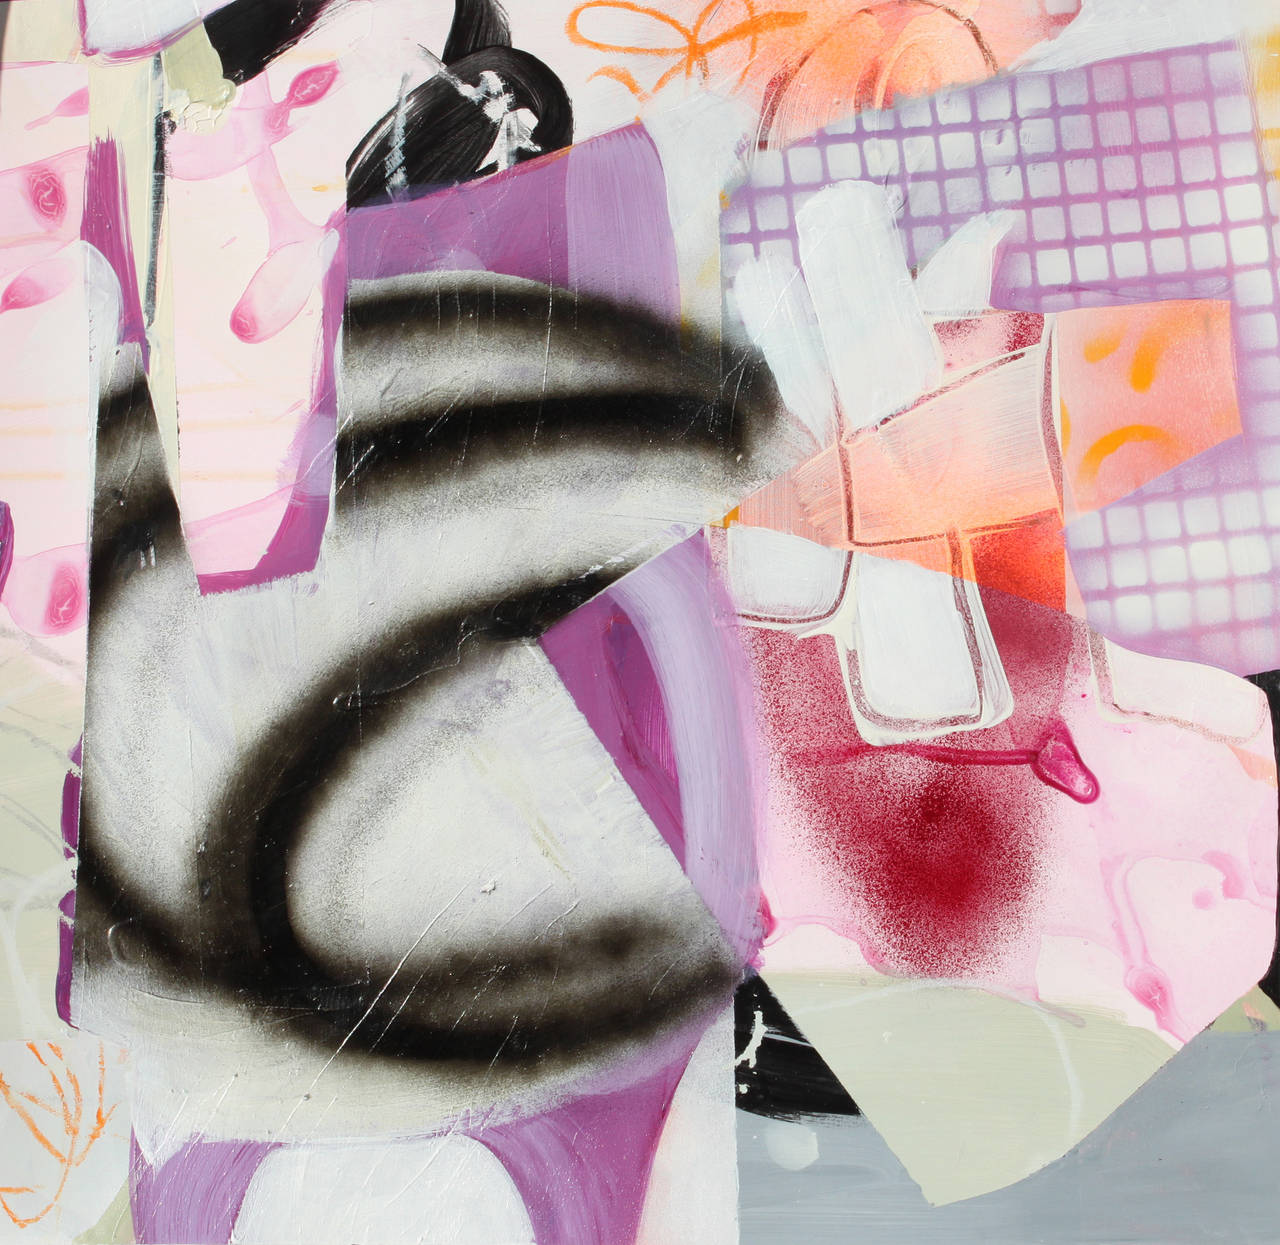 Composition No 18 - colorful collage in violet, peach, pink and tangerine - Art by Fiona Ackerman